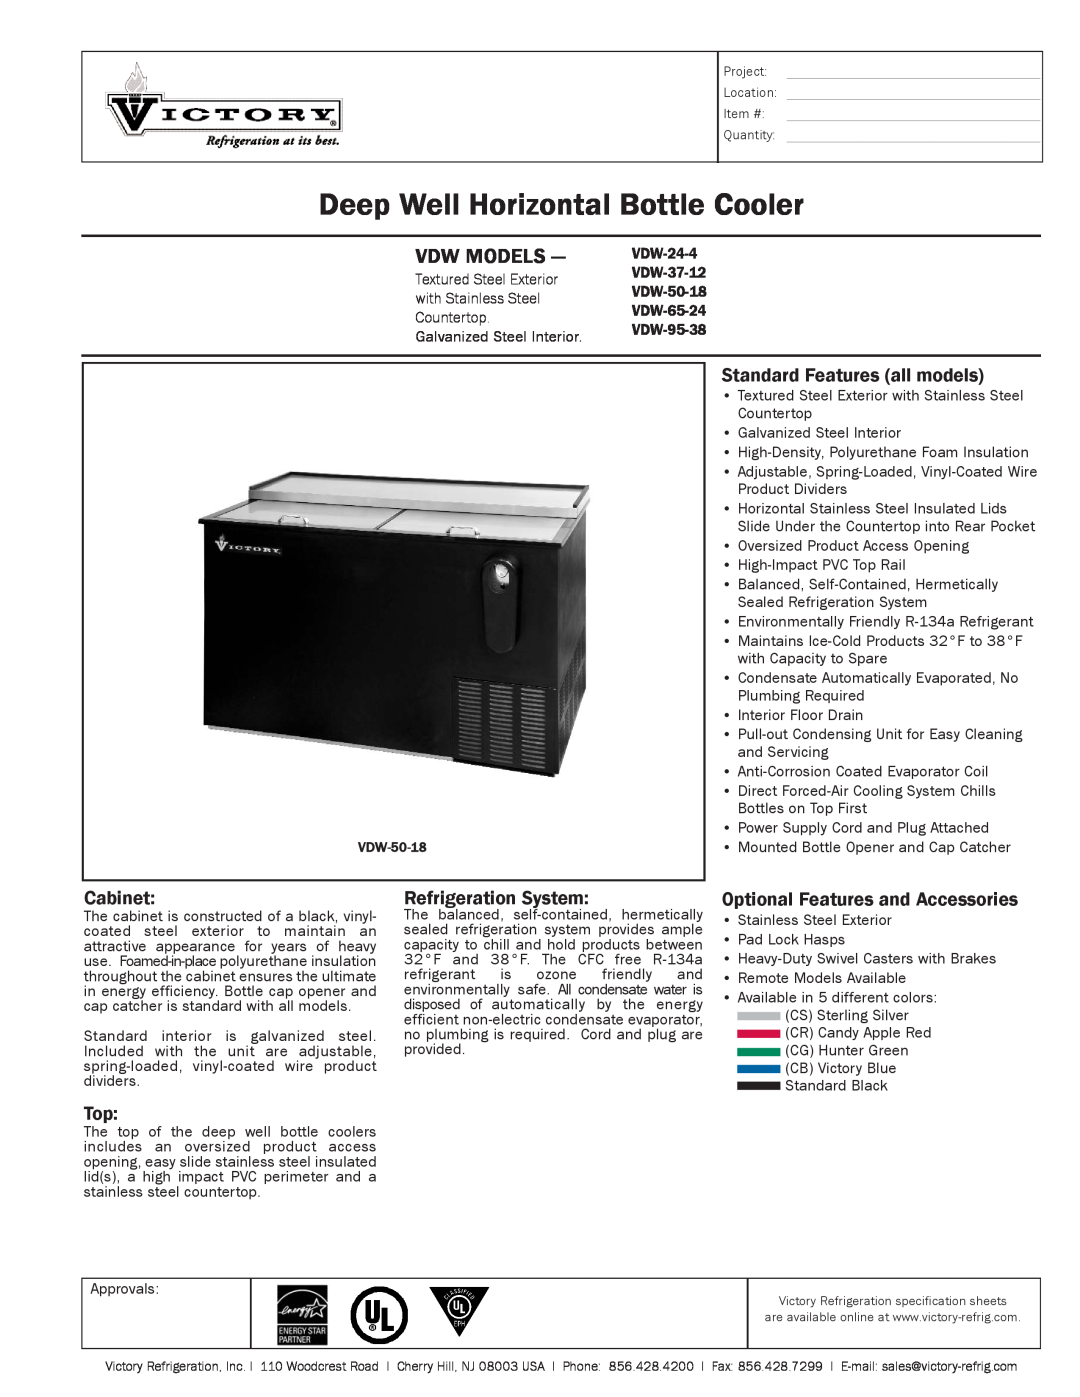 Victory Refrigeration VDW-24-4 specifications Deep Well Horizontal Bottle Cooler, Vdw Models, Standard Features all models 